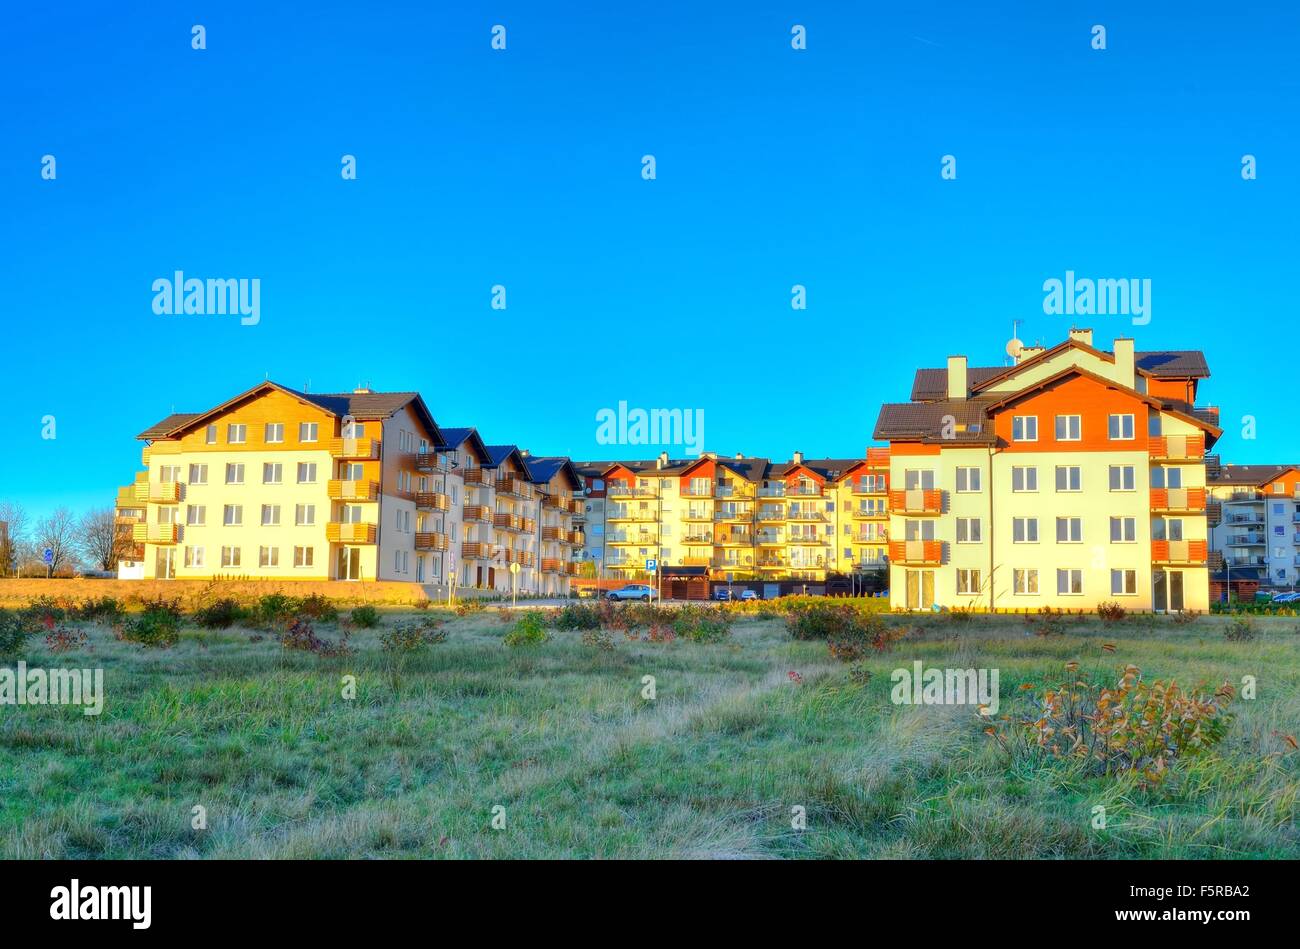 New housing estates. Public view of newly built block of flats in green area. Stock Photo